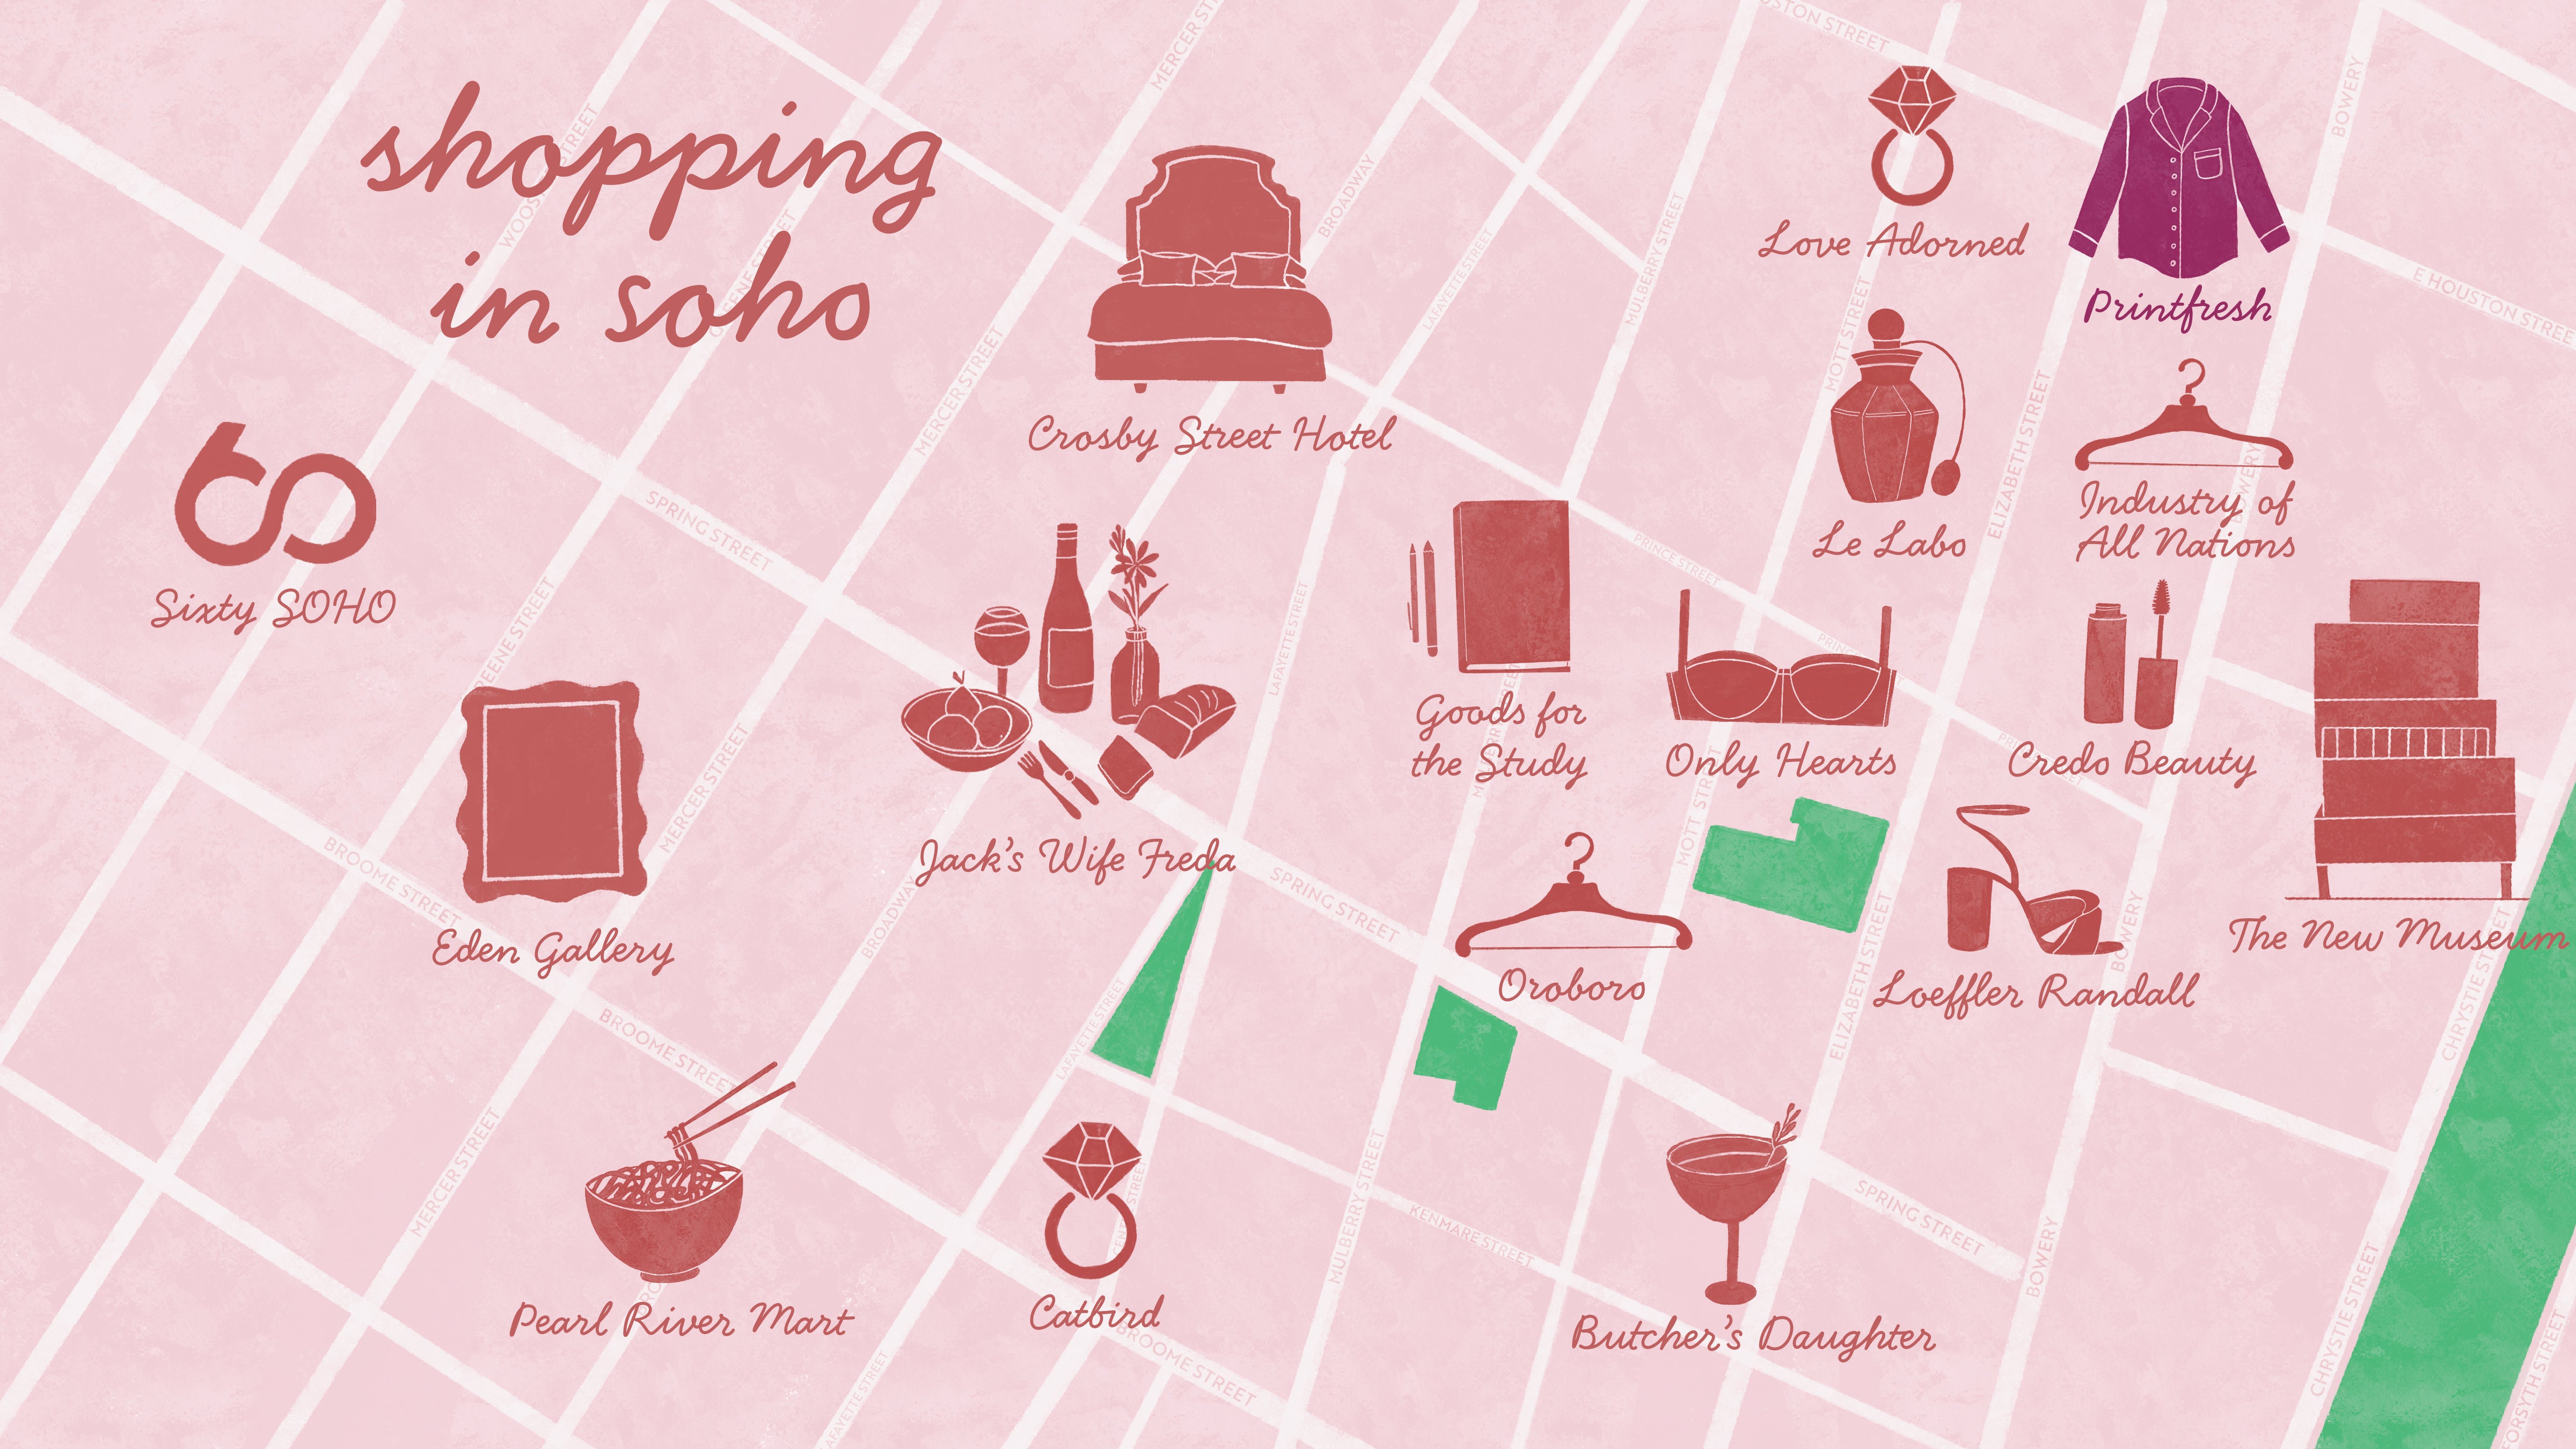 Our SoHo Guide for the Holidays